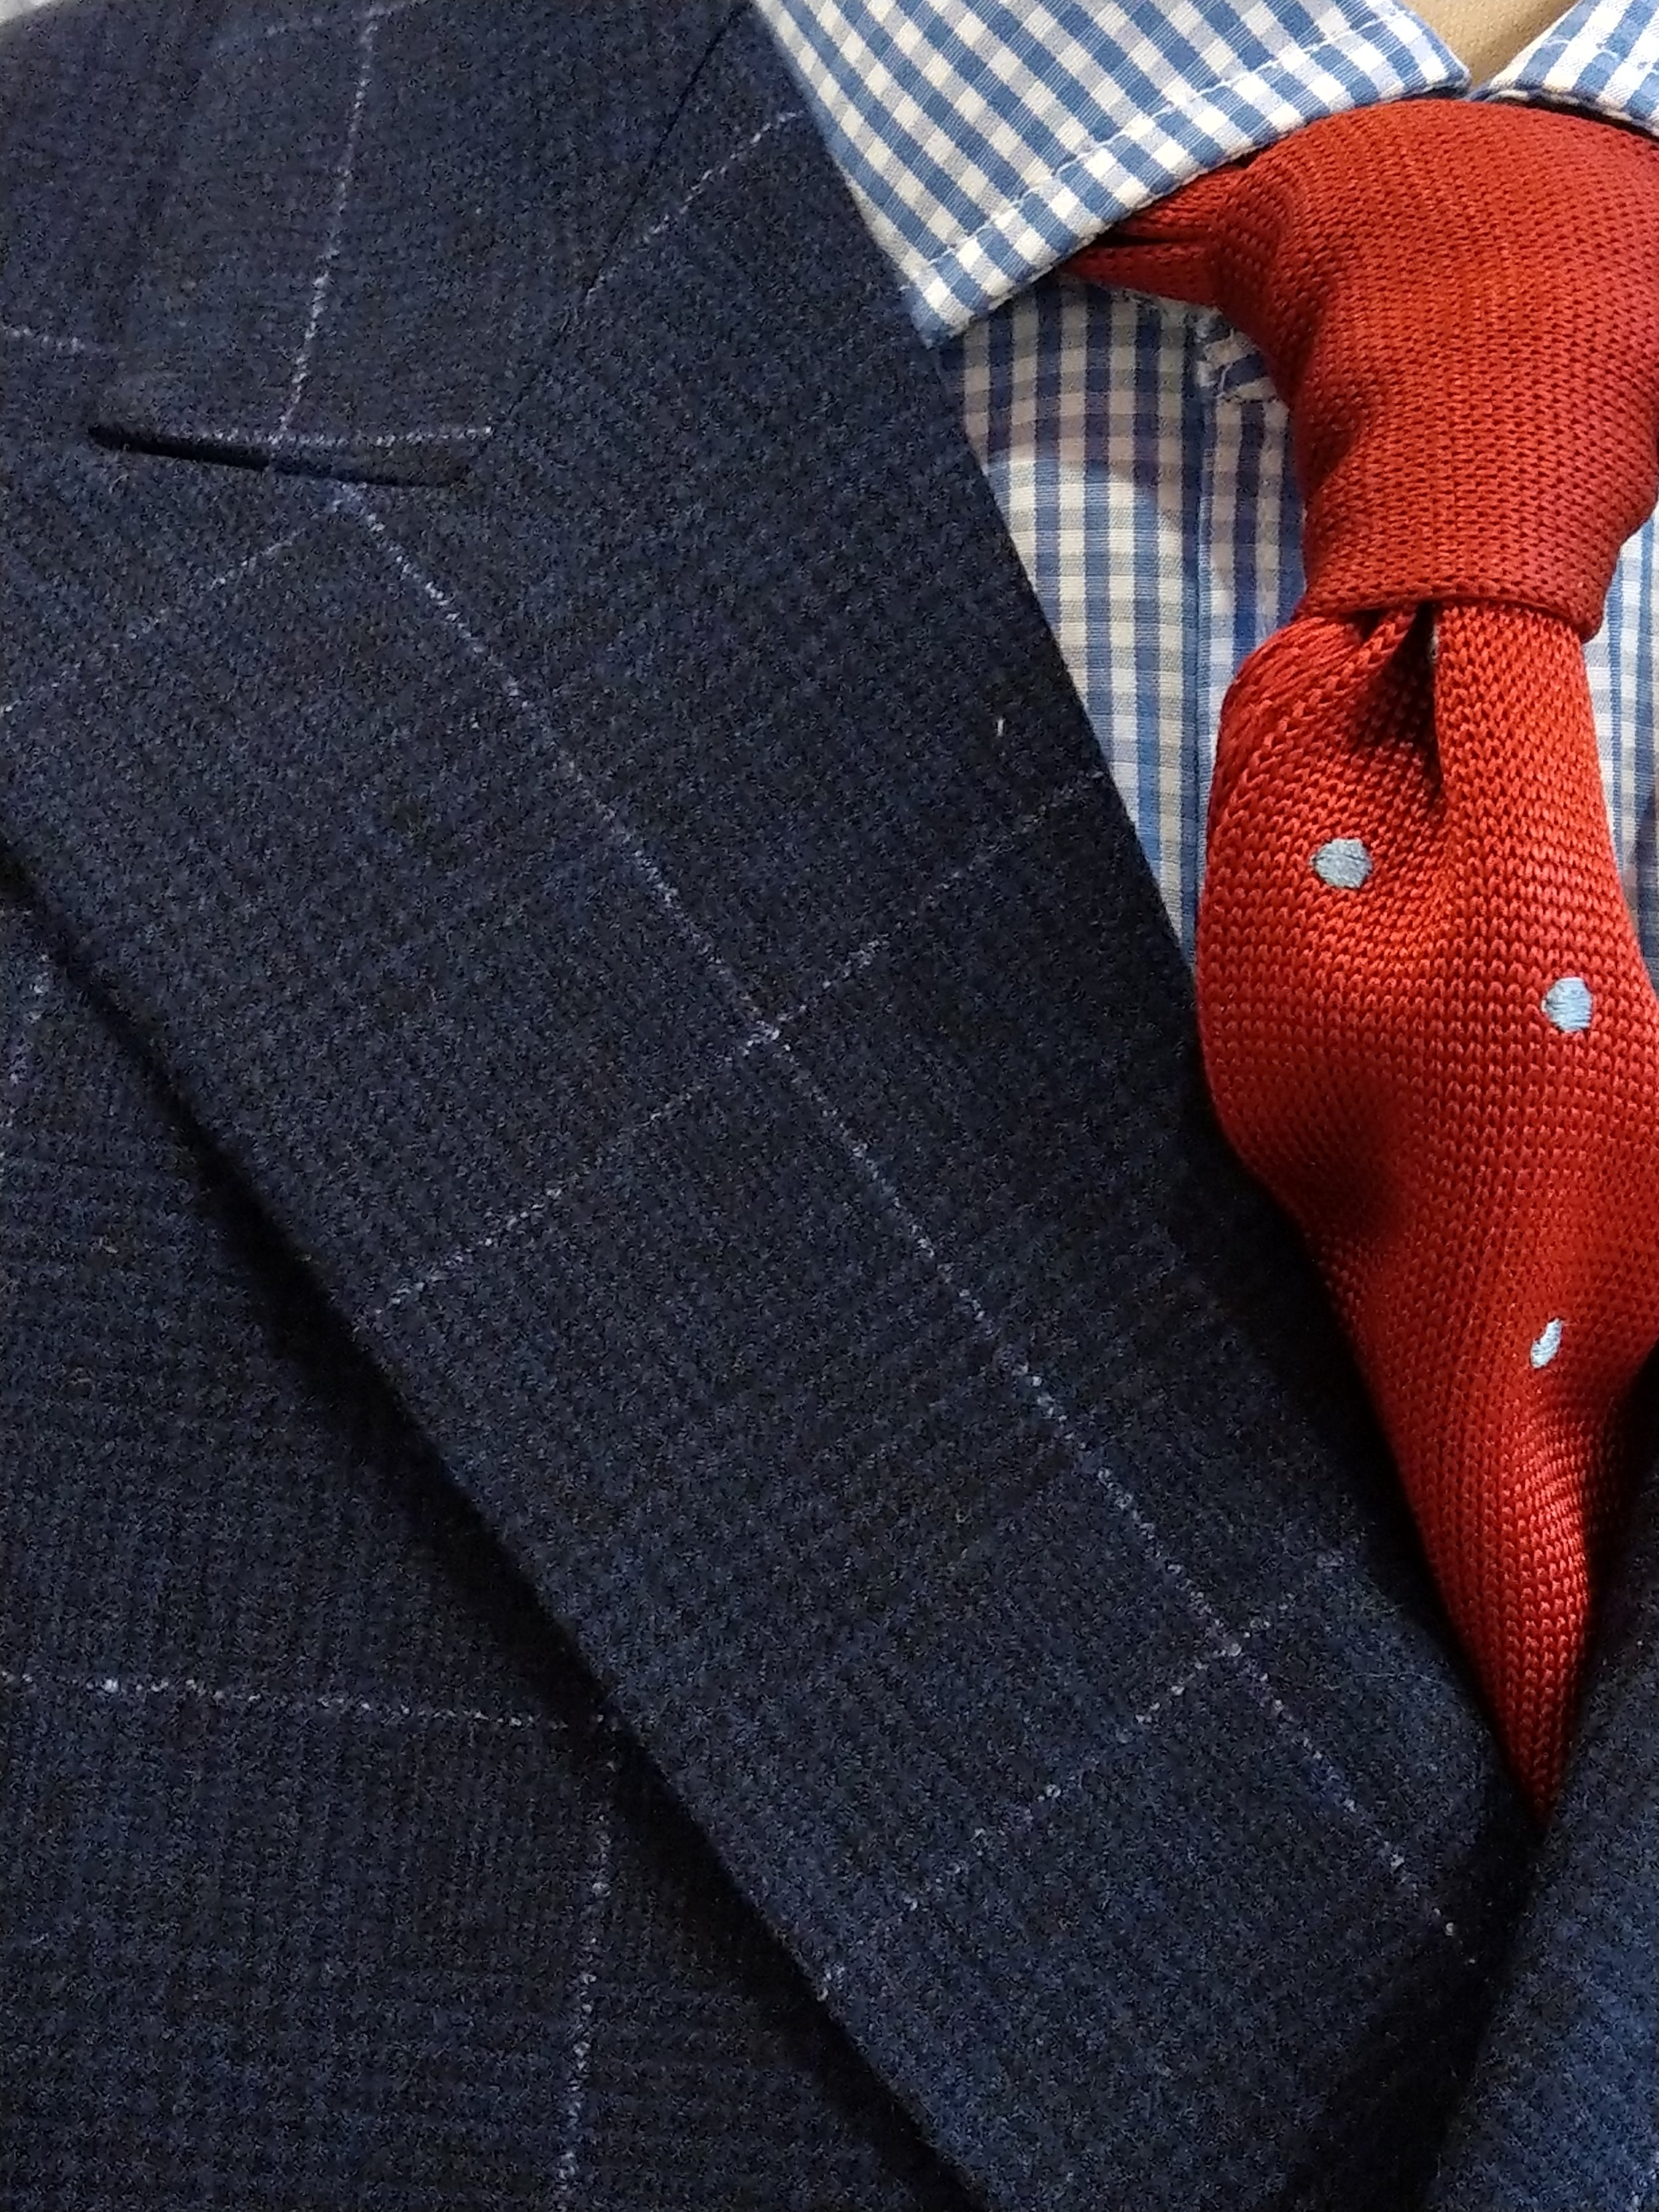 susannah-hall-tailors-bespoke-dormeuil-flannel-over-check-double-breasted-uk-made-britain.jpg